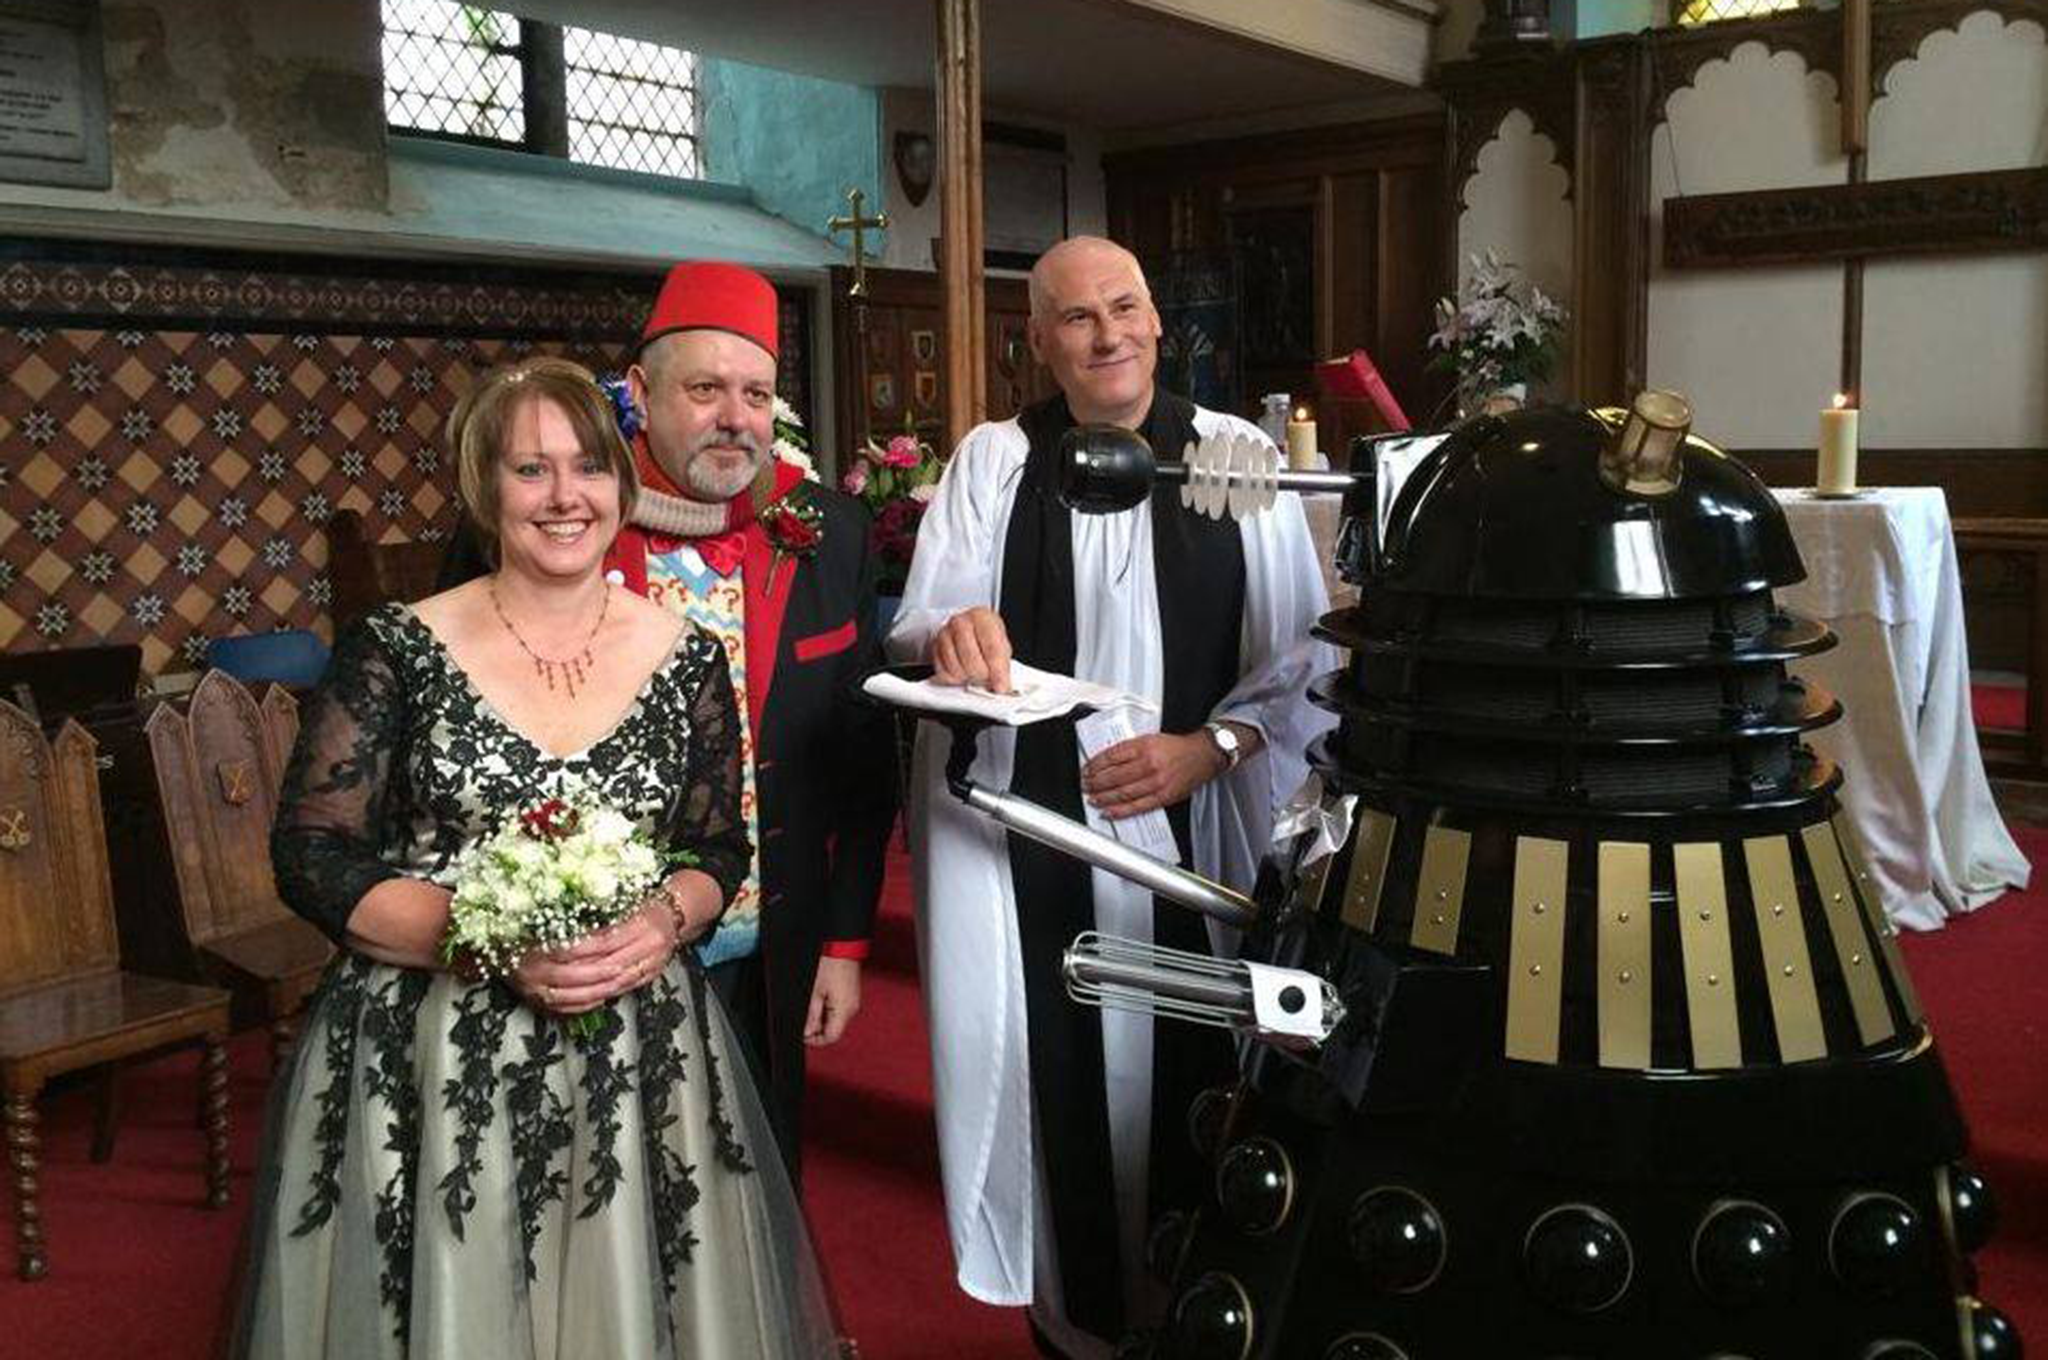 Paul and Jane Seymour renewed their vows with the help of this 'friendly' Dalek